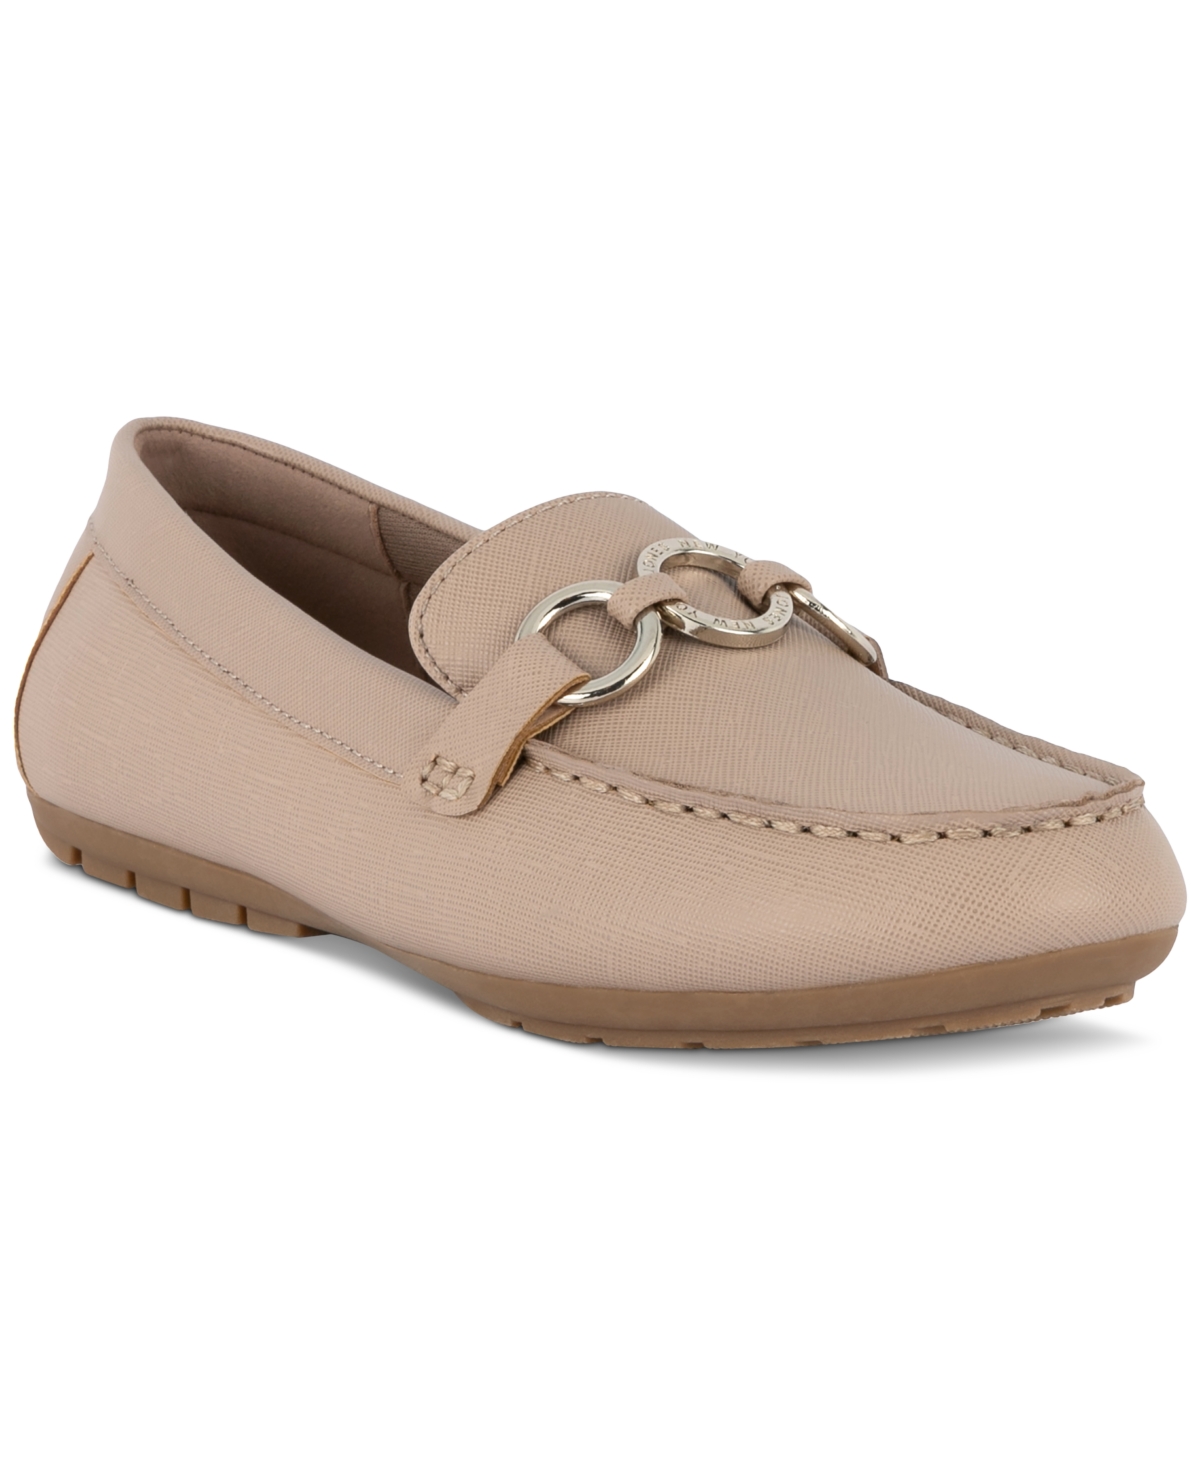 Women's Rannel Chain Ornamented Slip On Loafers - Taupe